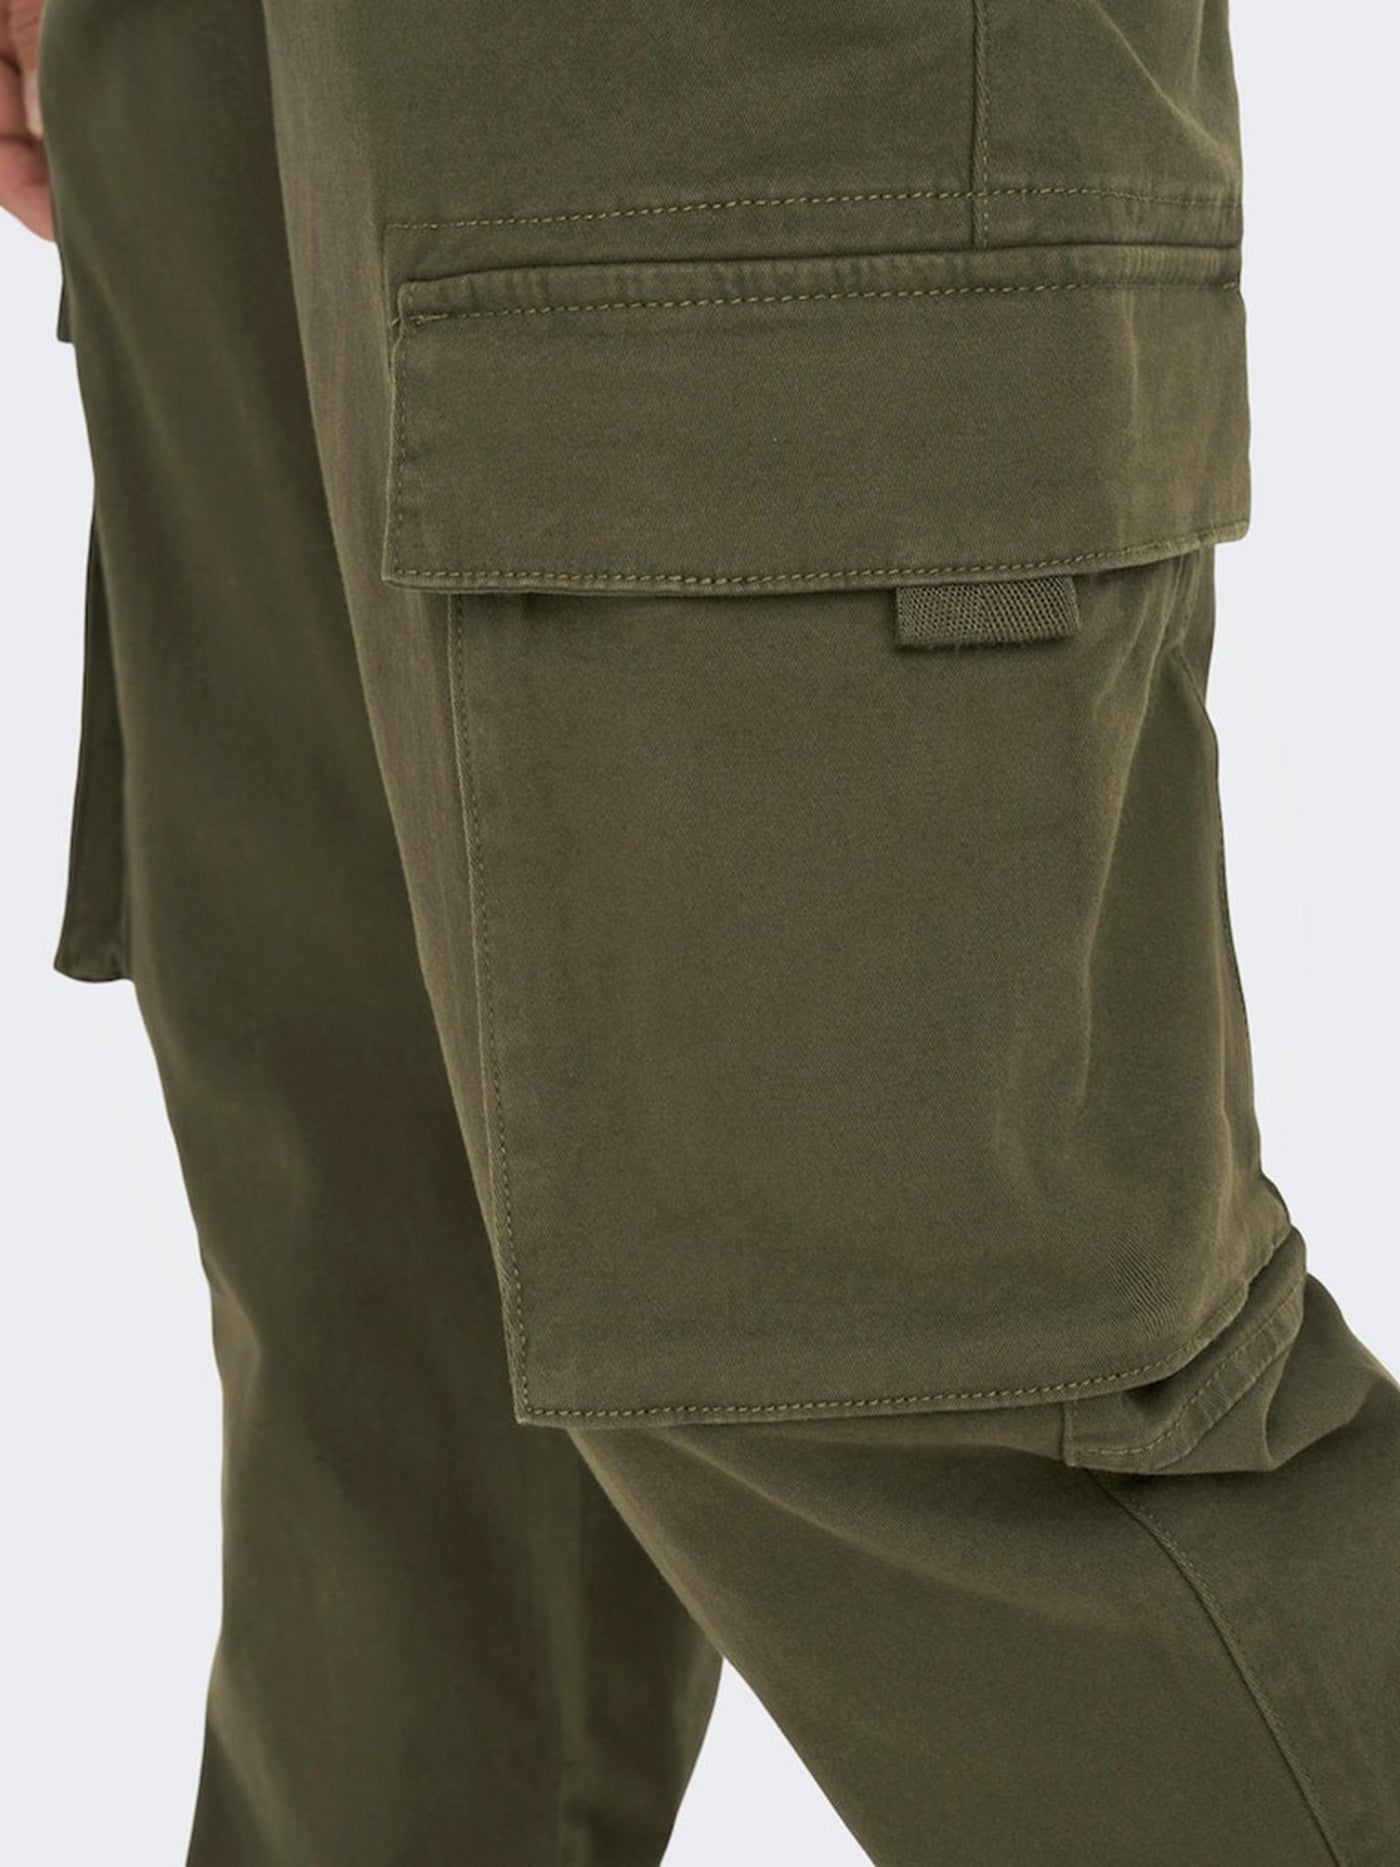 Next Cargo Pants - Olive Night - Only & Sons - Grøn 2